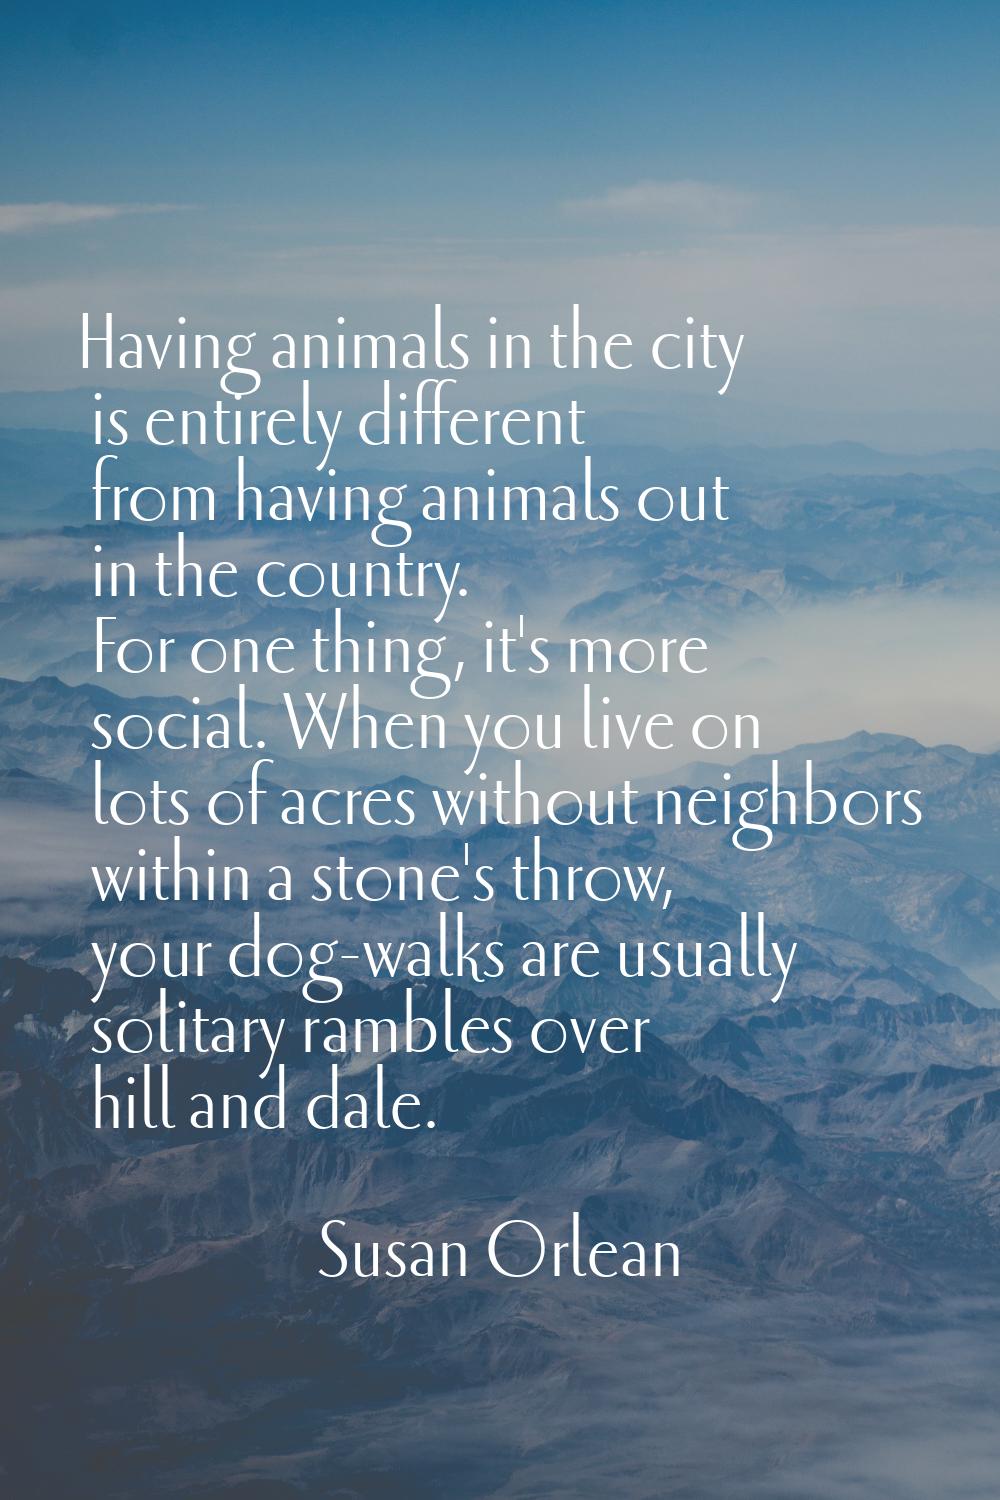 Having animals in the city is entirely different from having animals out in the country. For one th